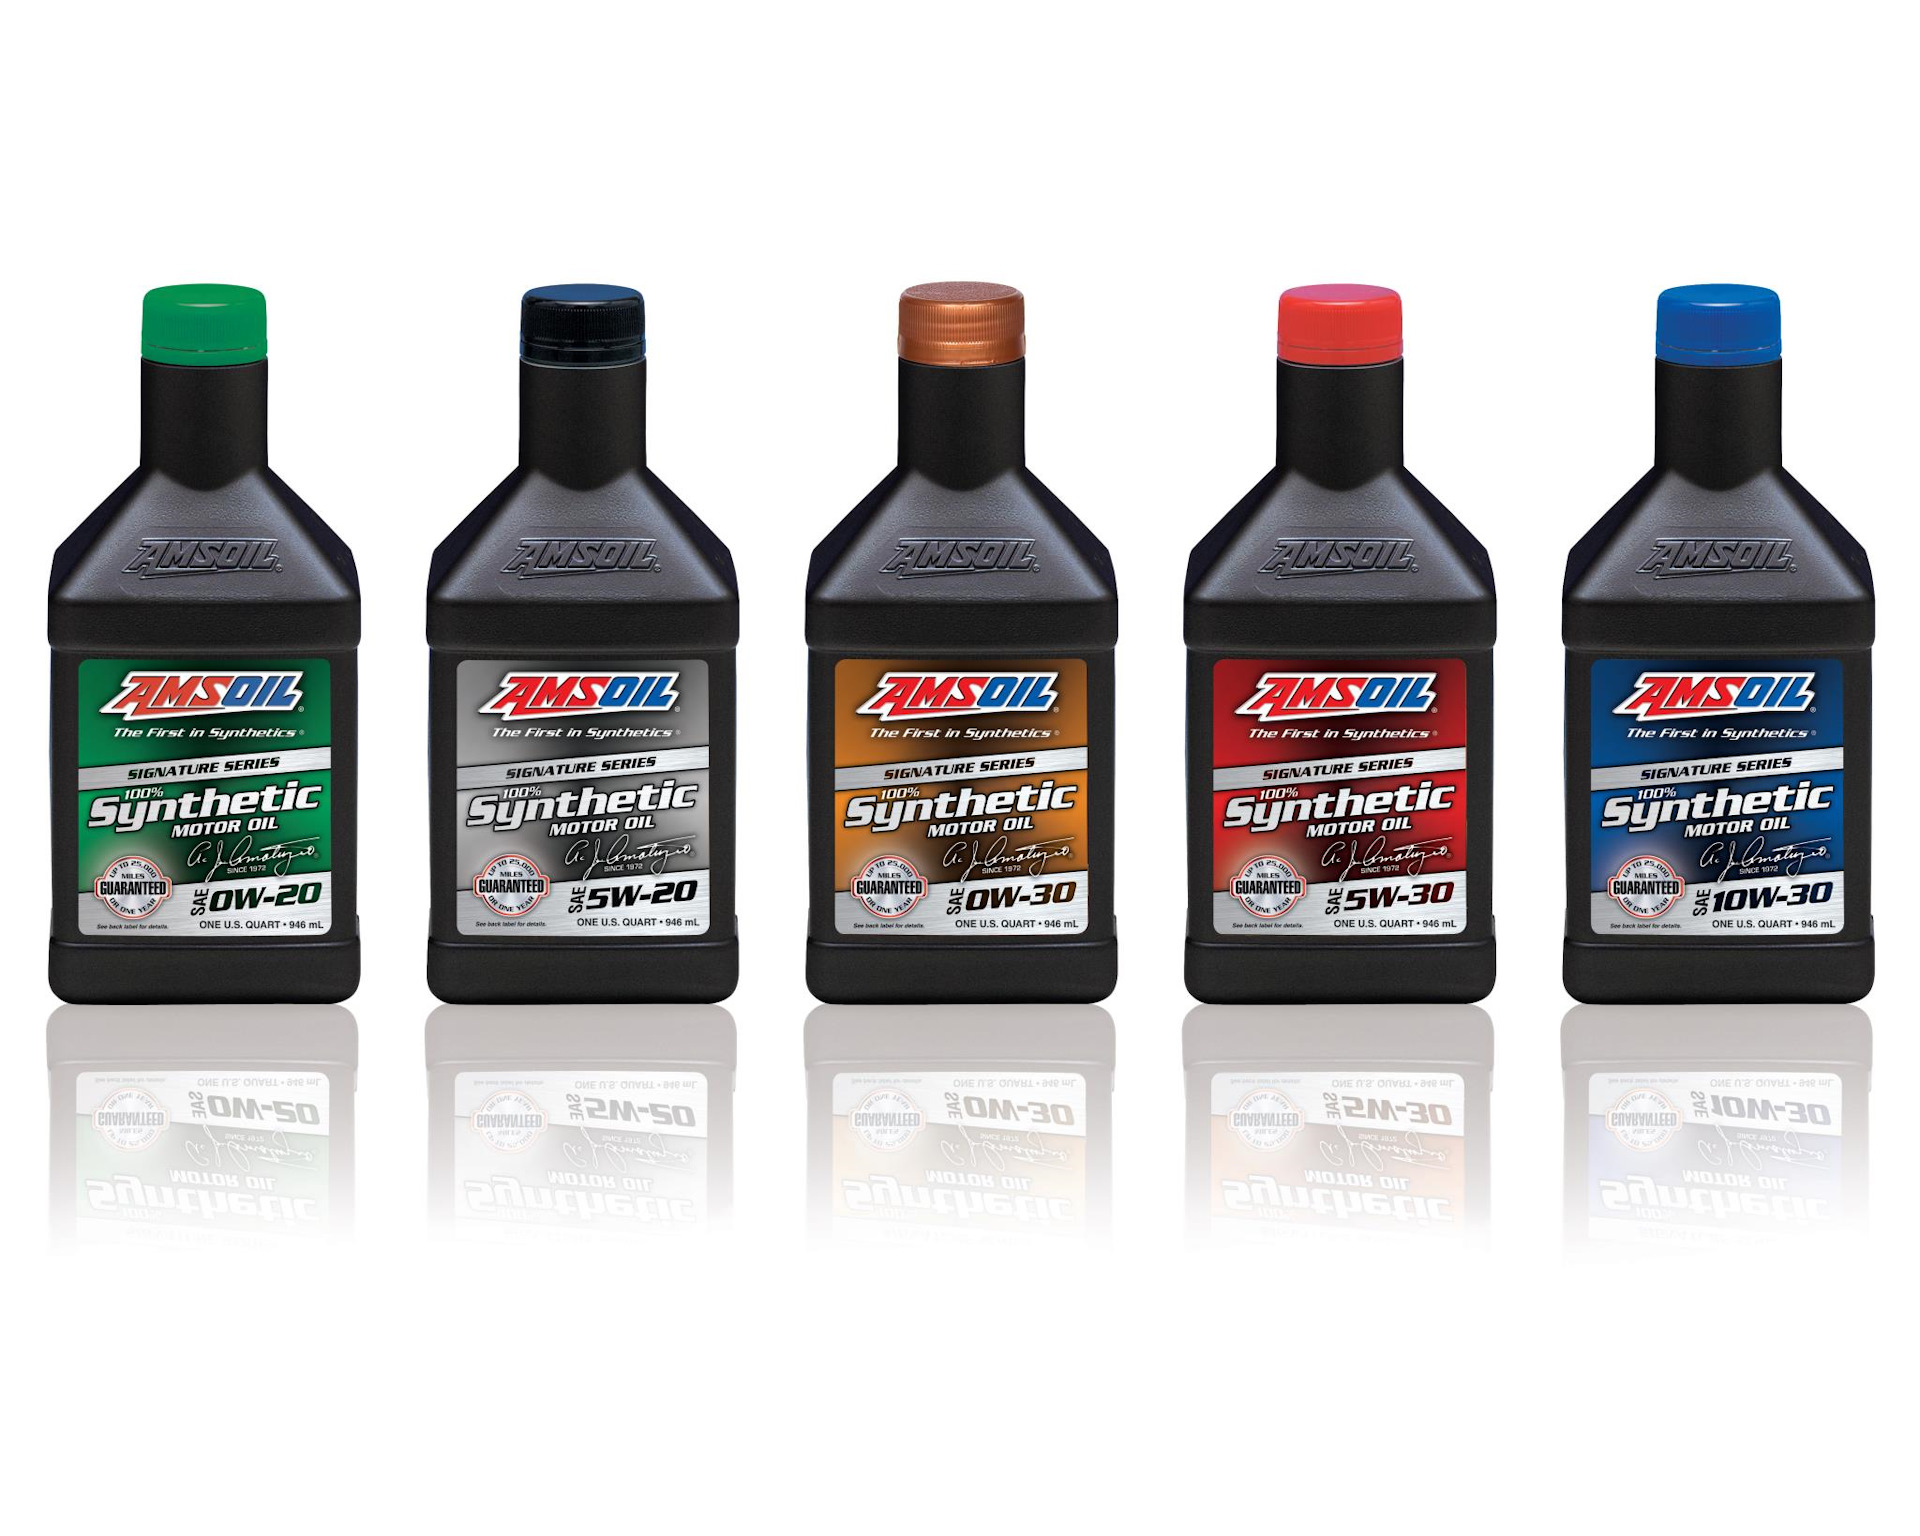 Signature series synthetic. АМСОИЛ сигнатуре. AMSOIL Signature Series Synthetic Motor Oil 5w-30. Масло Premium. AMSOIL обкаточное масло.